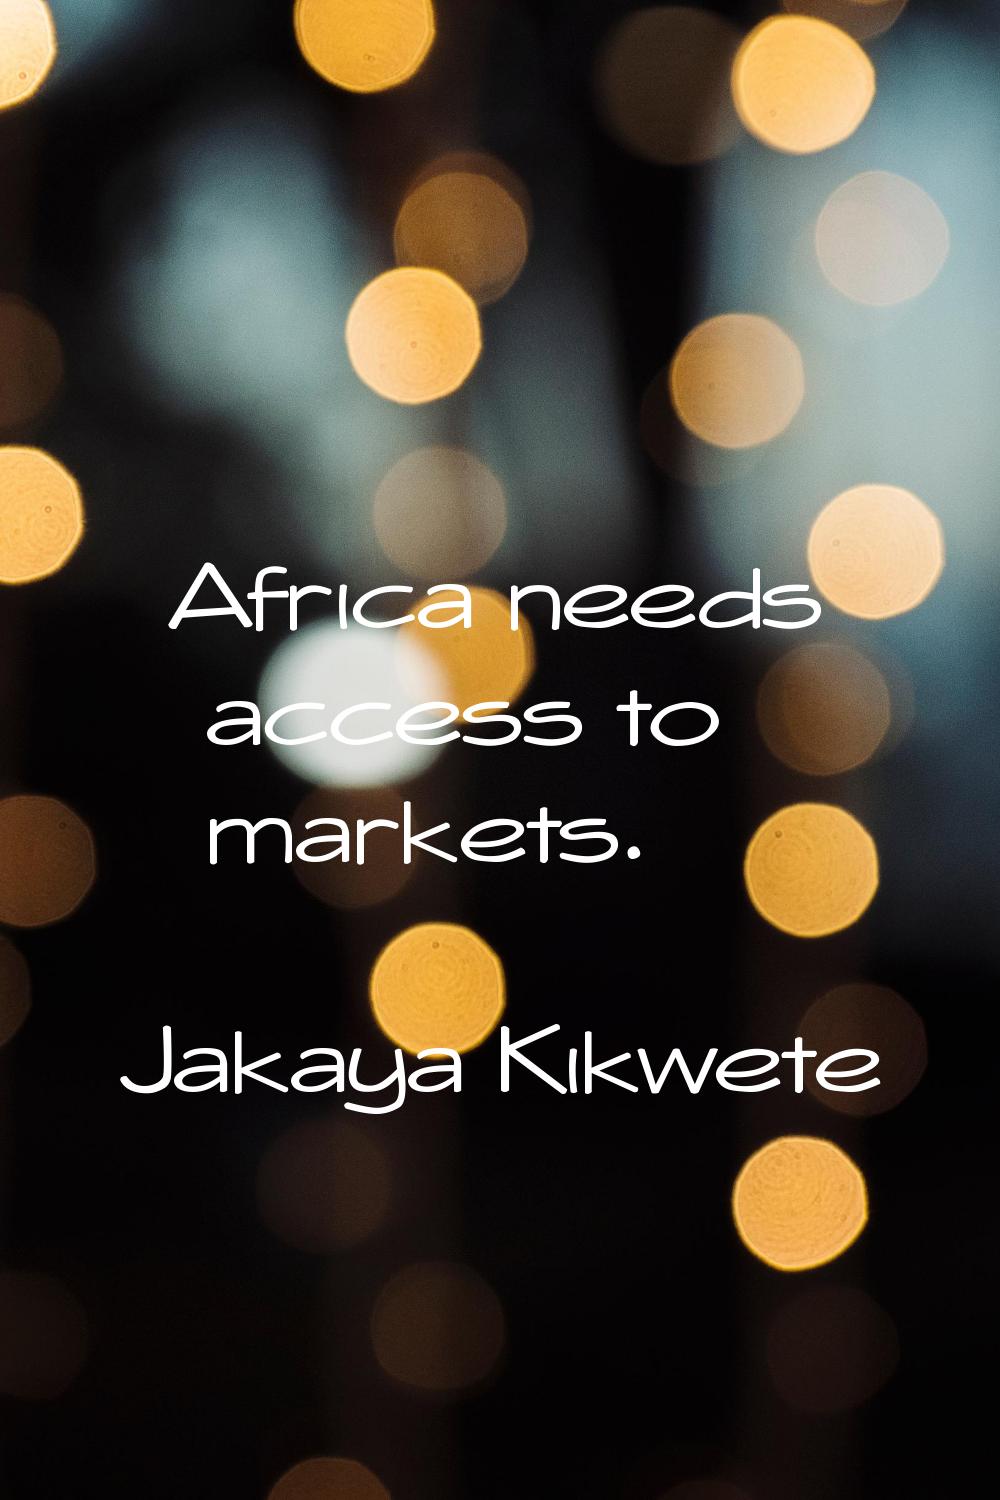 Africa needs access to markets.